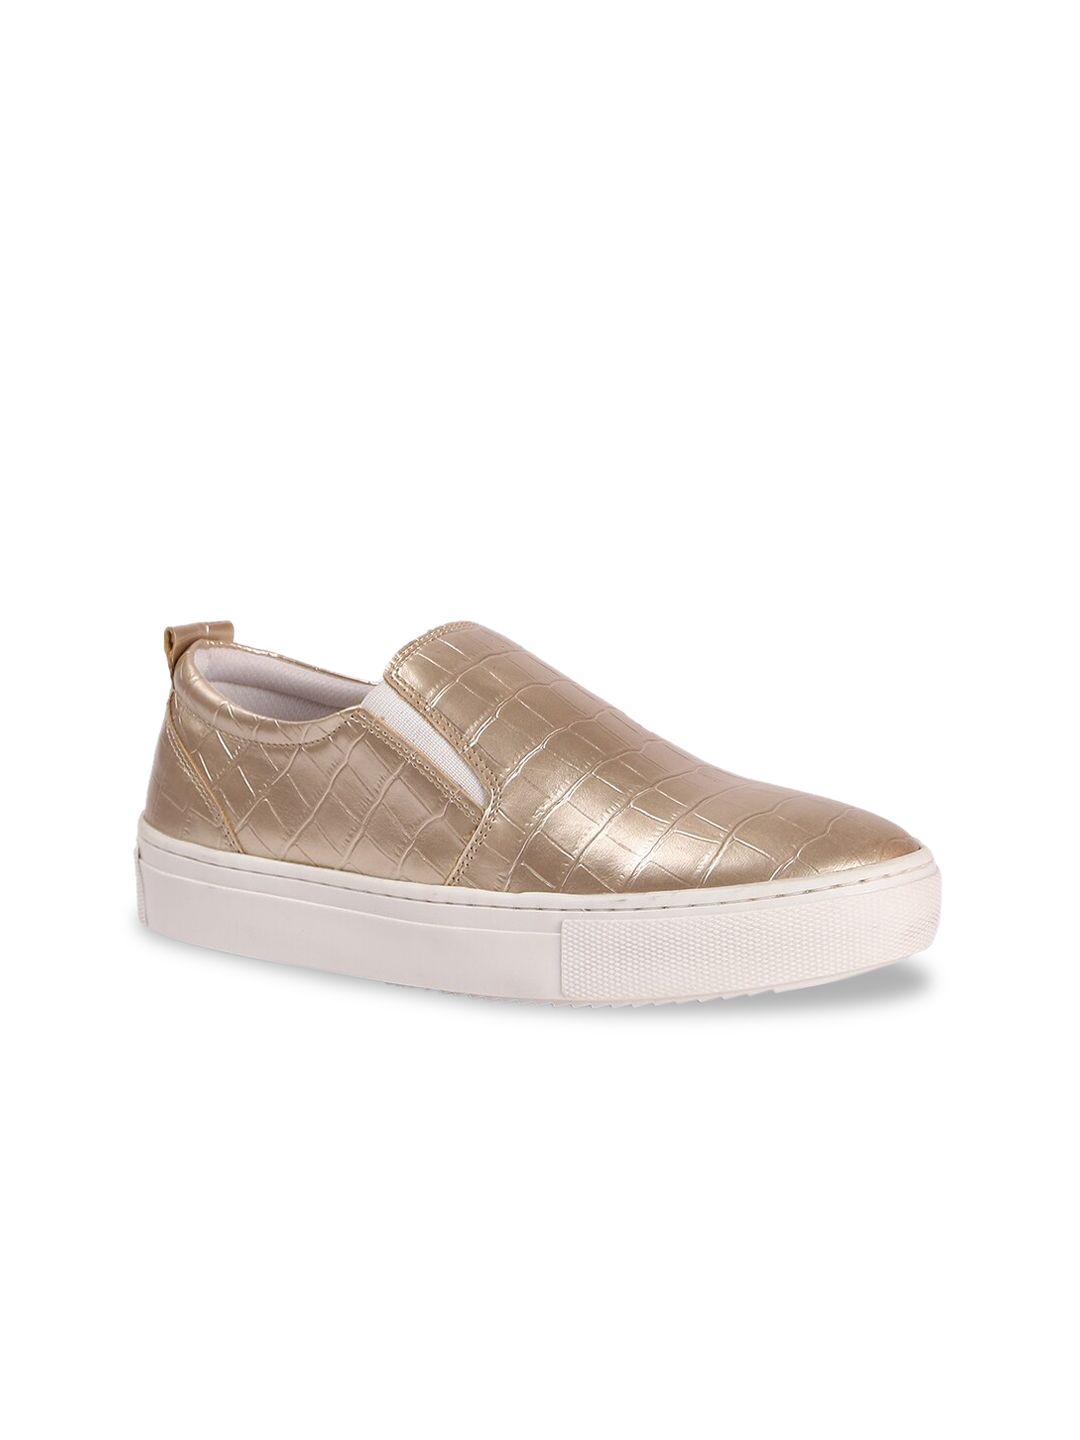 FOREVER 21 Women Gold-Toned Textured PU Slip-On Sneakers Price in India